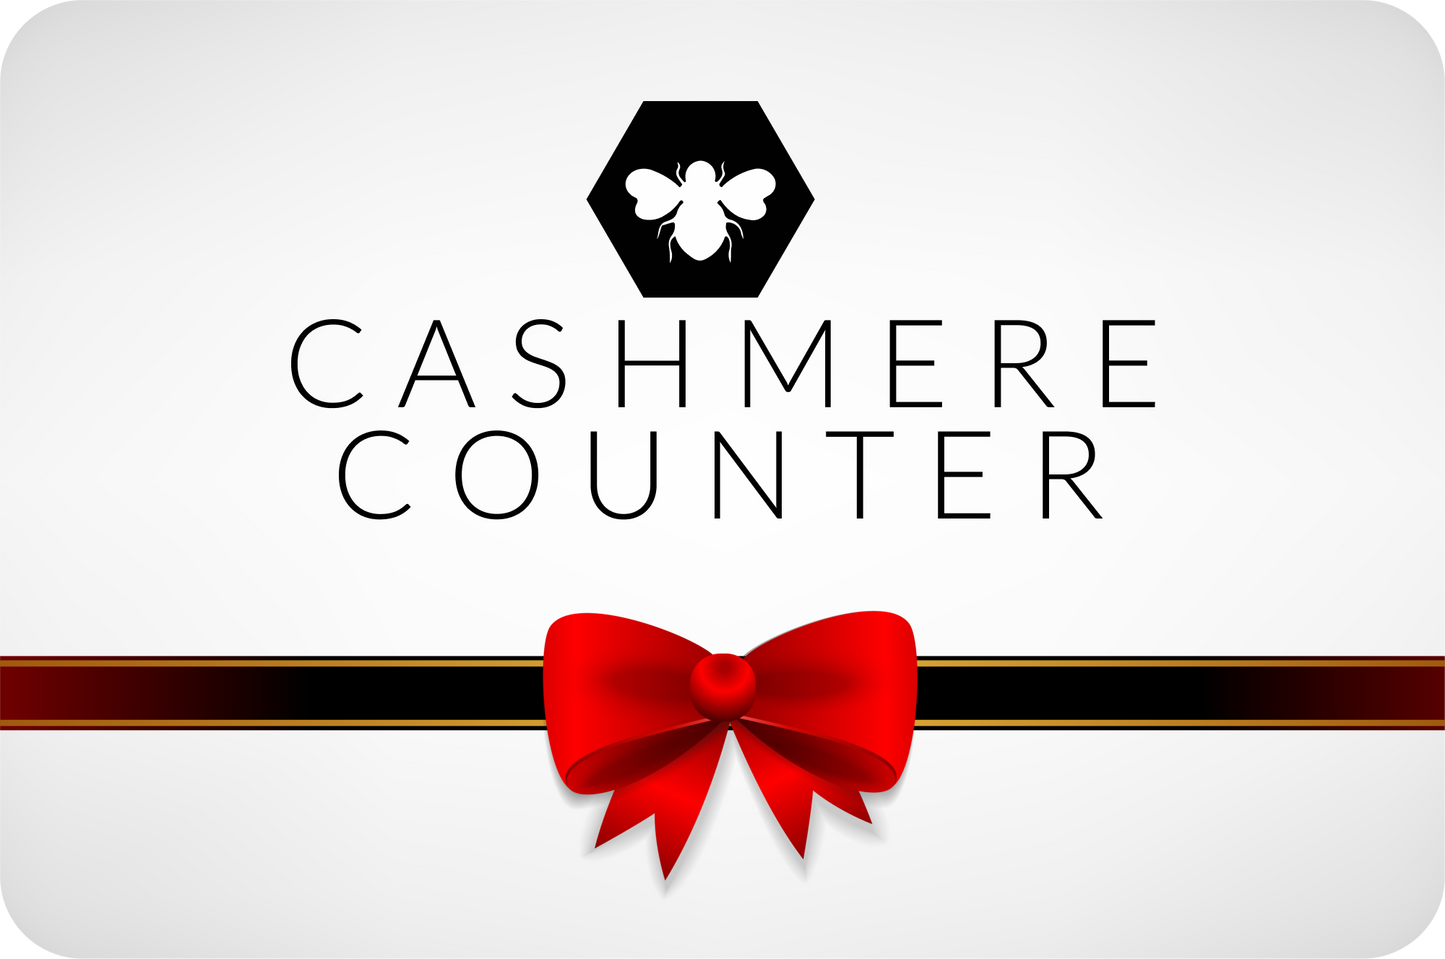 Cashmere counter gift card